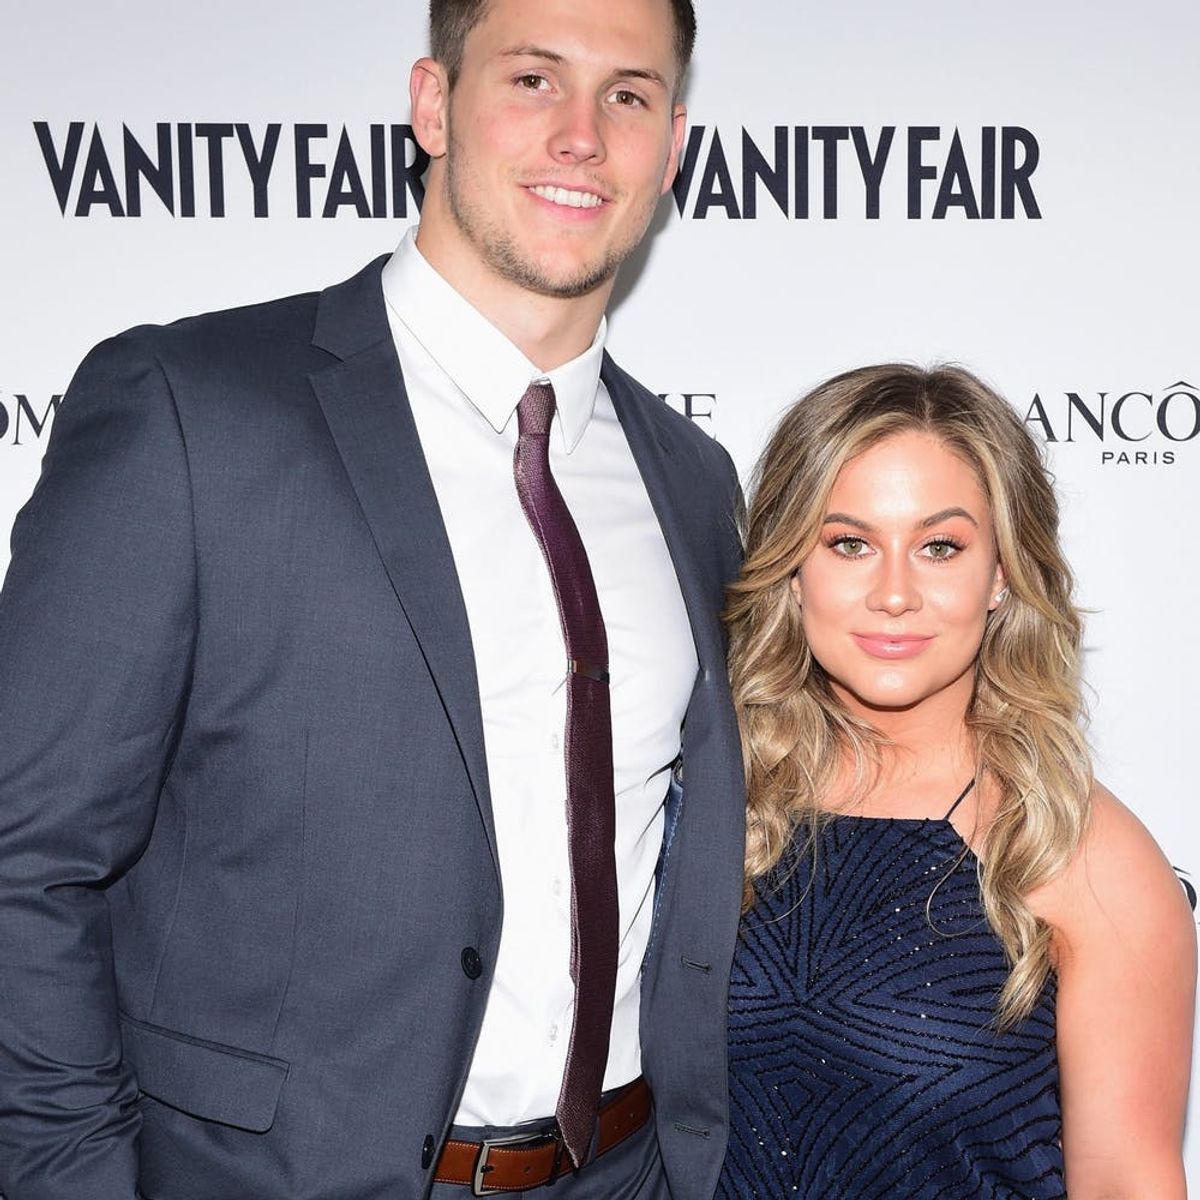 Olympic Gymnast Shawn Johnson Shares Her Heartbreaking Story of Miscarriage